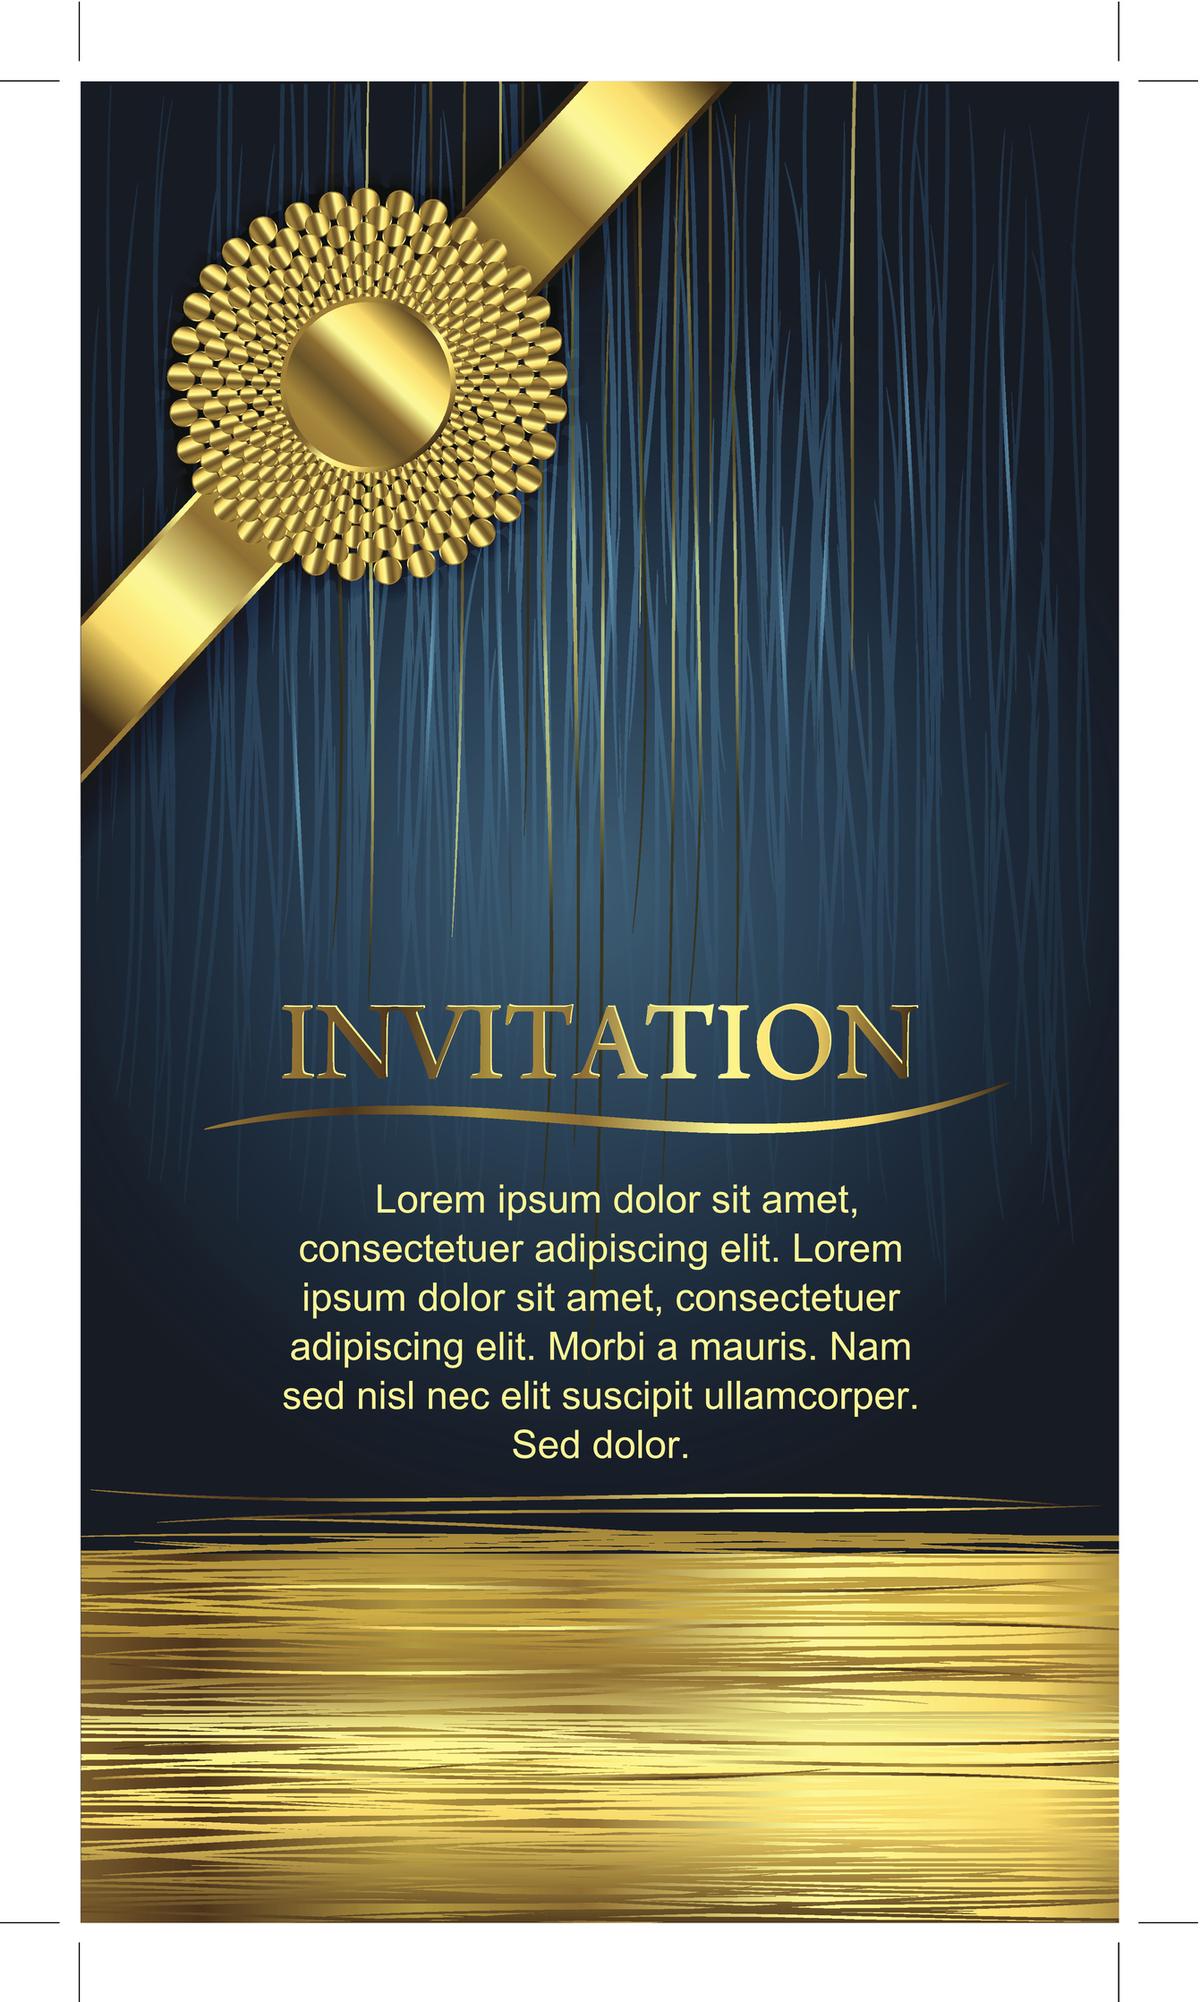 share-more-than-74-cake-cutting-ceremony-invitation-awesomeenglish-edu-vn